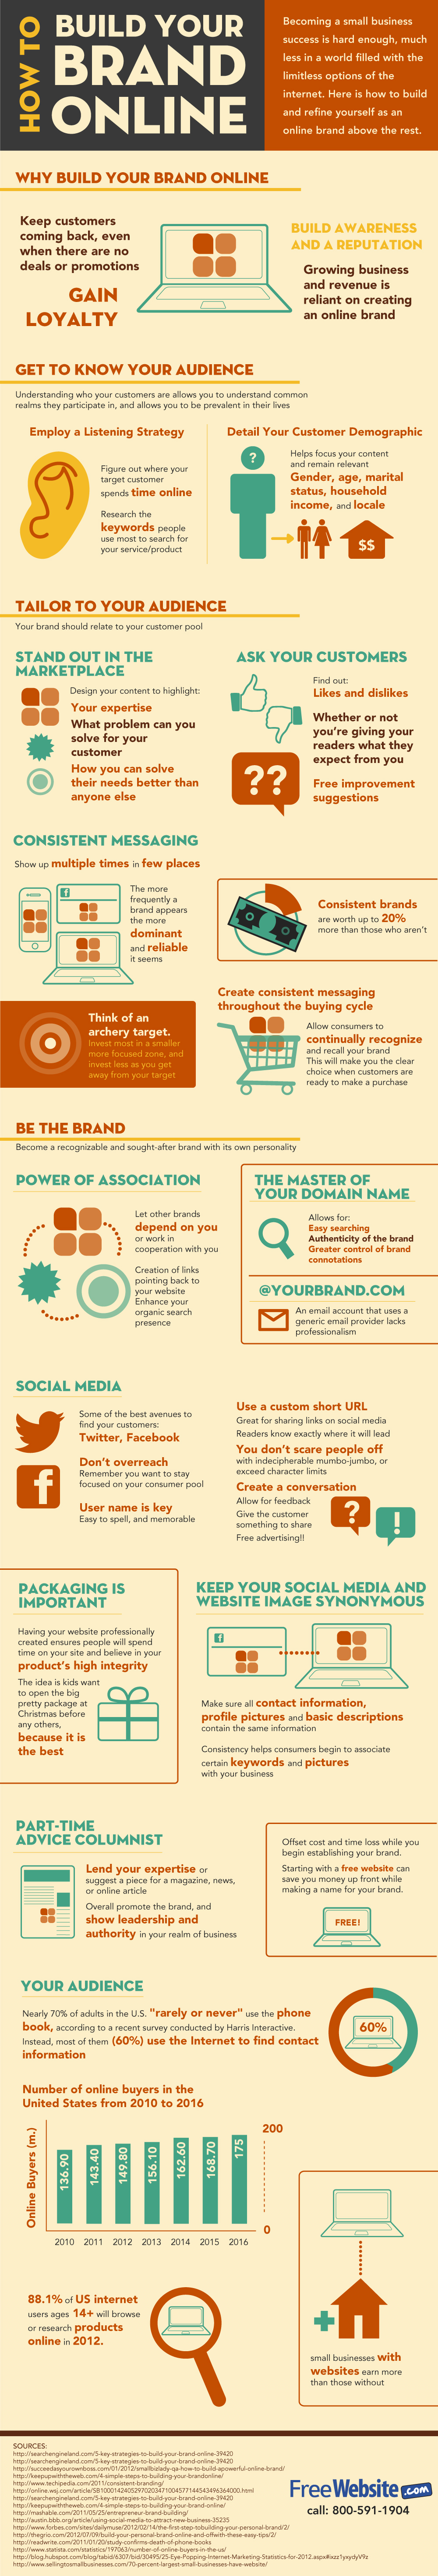 How To Build Your Brand Online